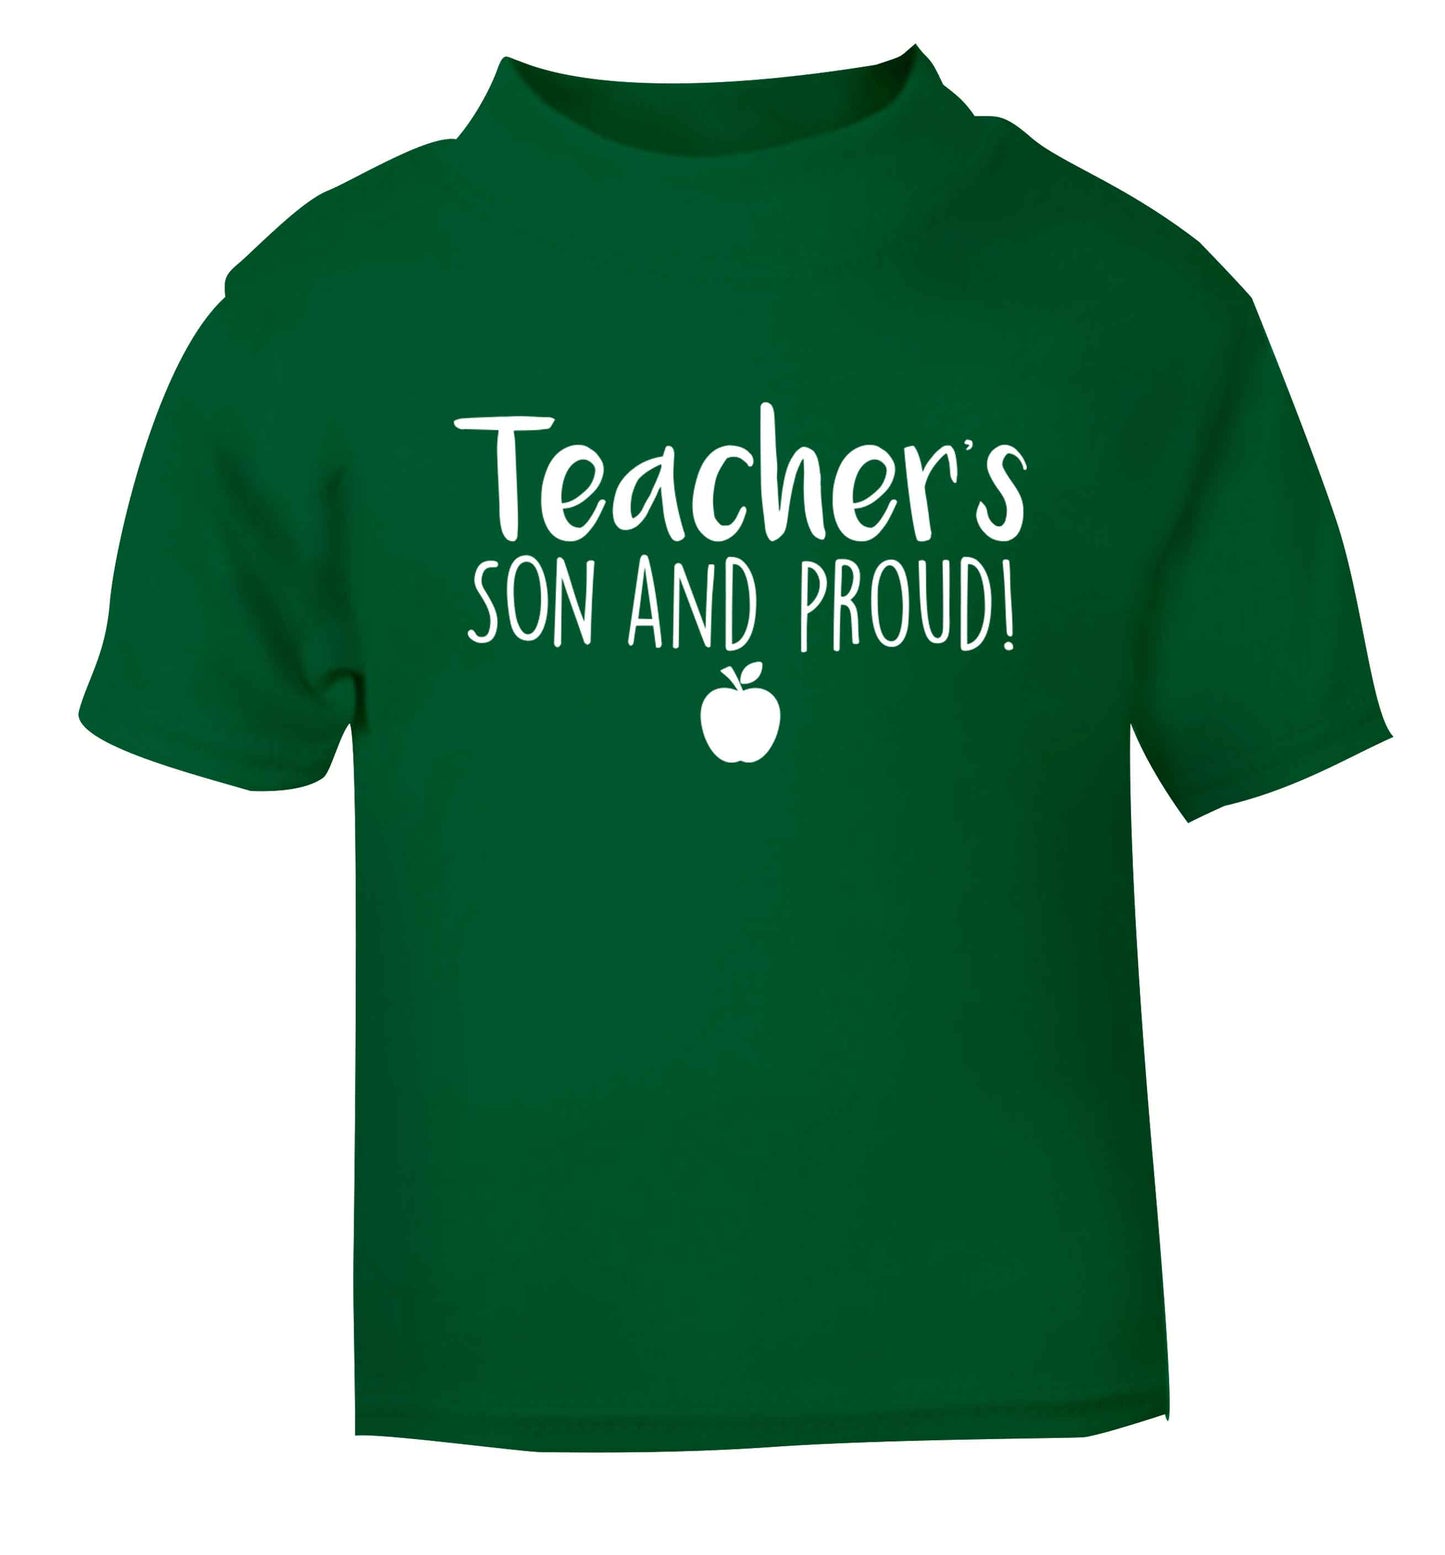 Teachers son and proud green baby toddler Tshirt 2 Years